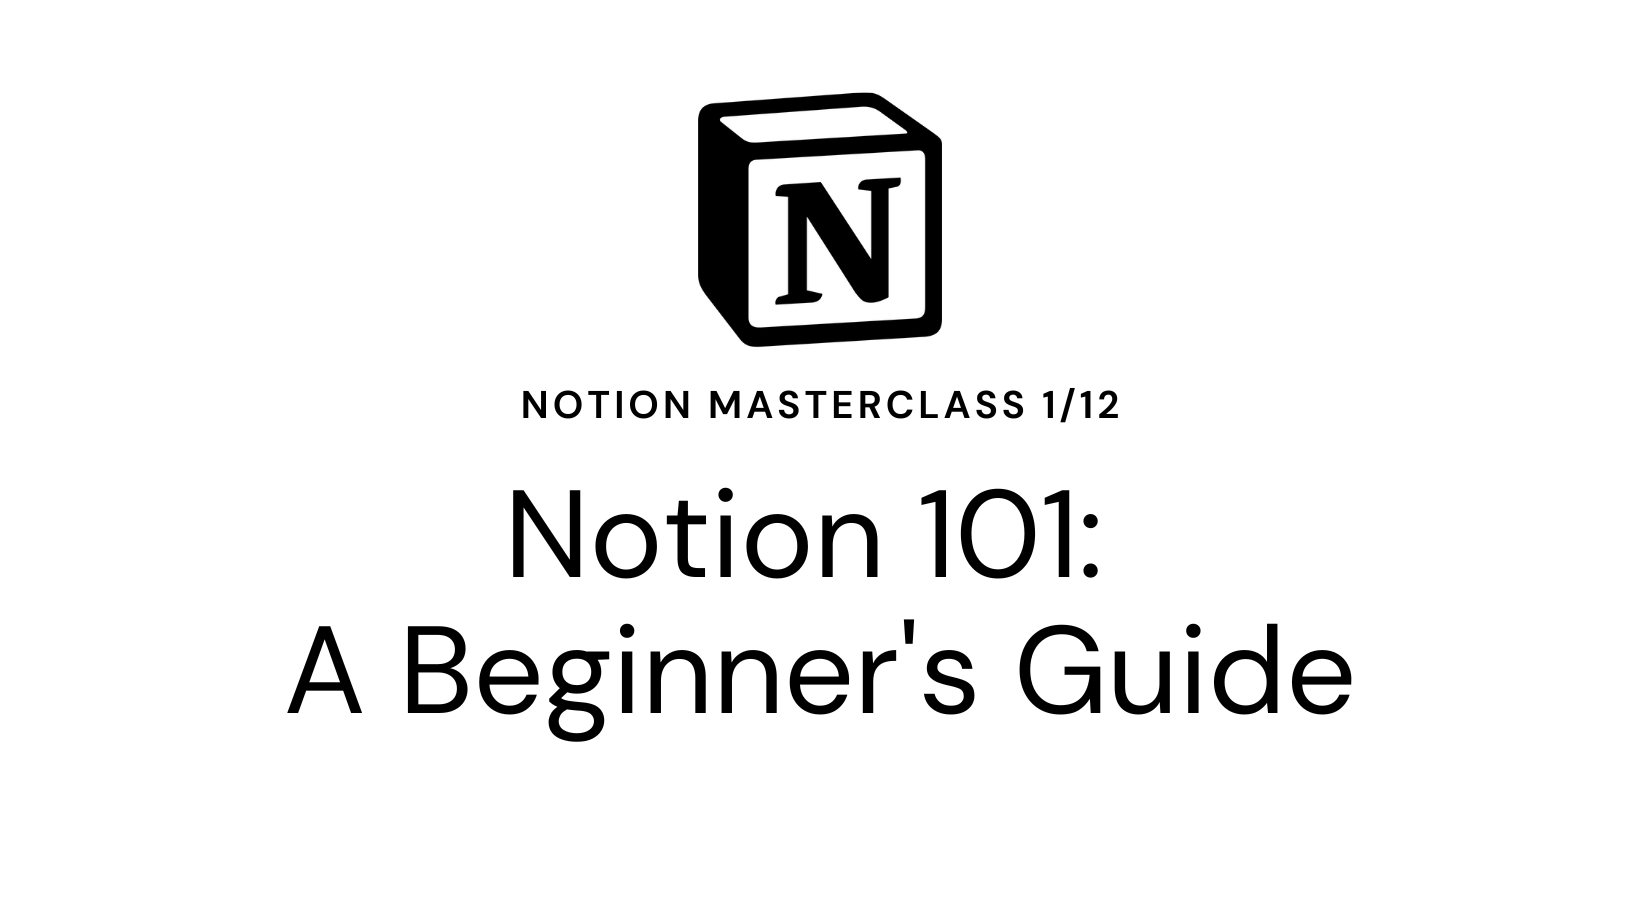 Notion 101: A Beginner’s Guide to Getting Started with Notion